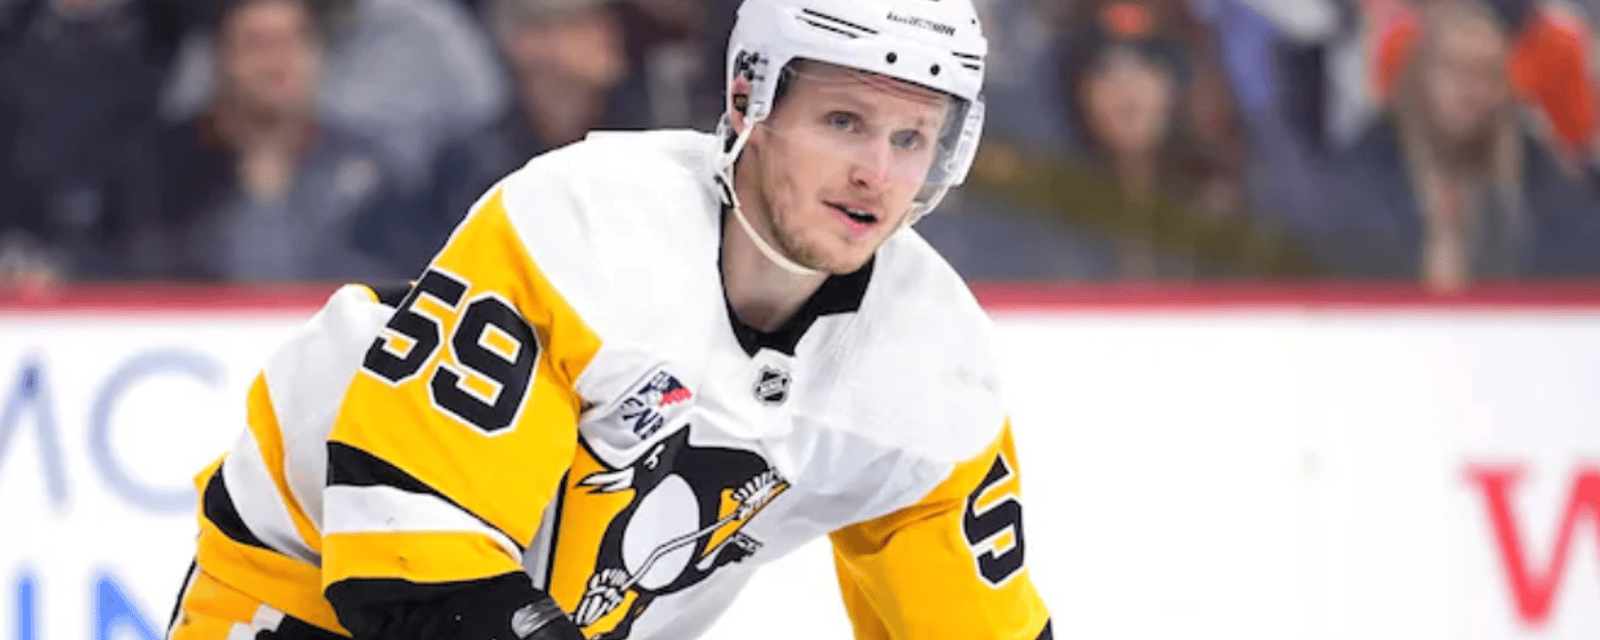 Major blow to the Penguins in loss vs. Panthers 